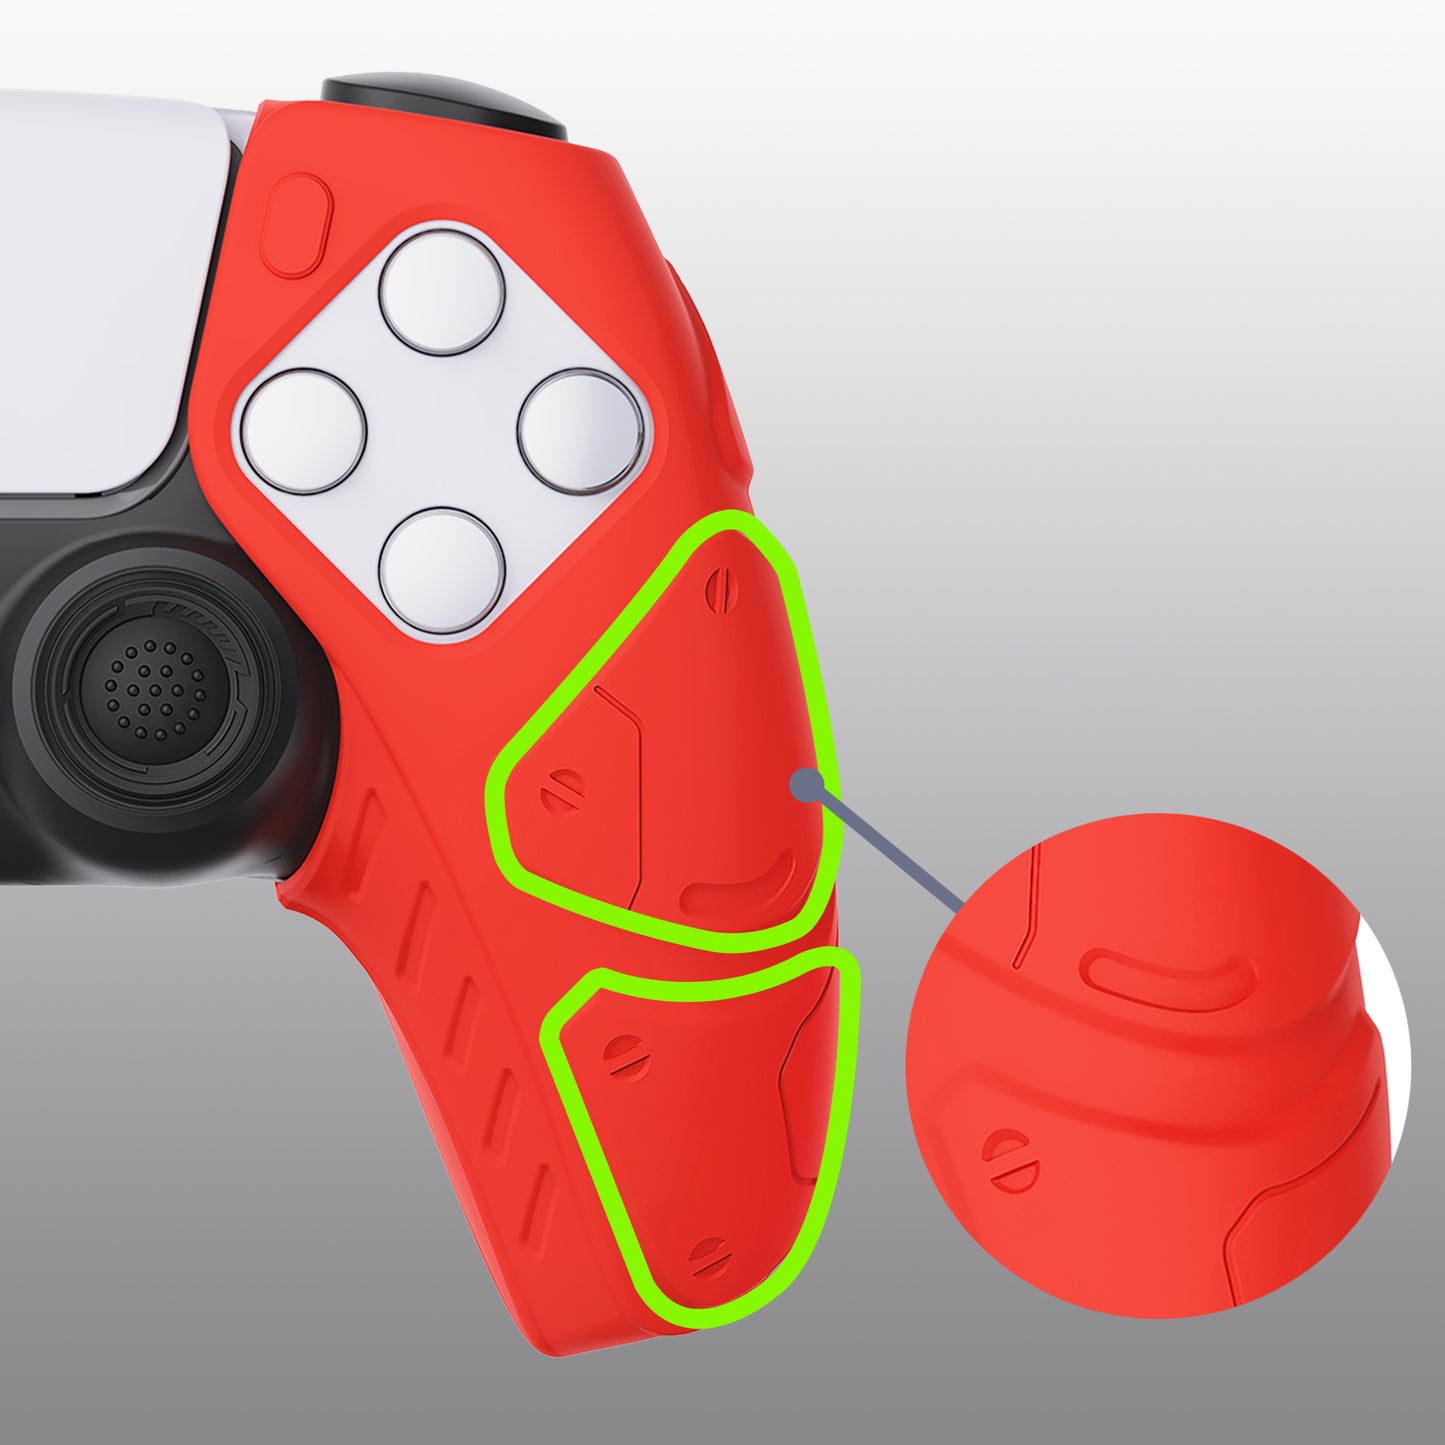 PlayVital Mecha Edition Anti-Slip Silicone Cover Skin with Thumb Grip Caps for PS5 Wireless Controller - Compatible with Charging Station - Passion Red - JGPF009 PlayVital